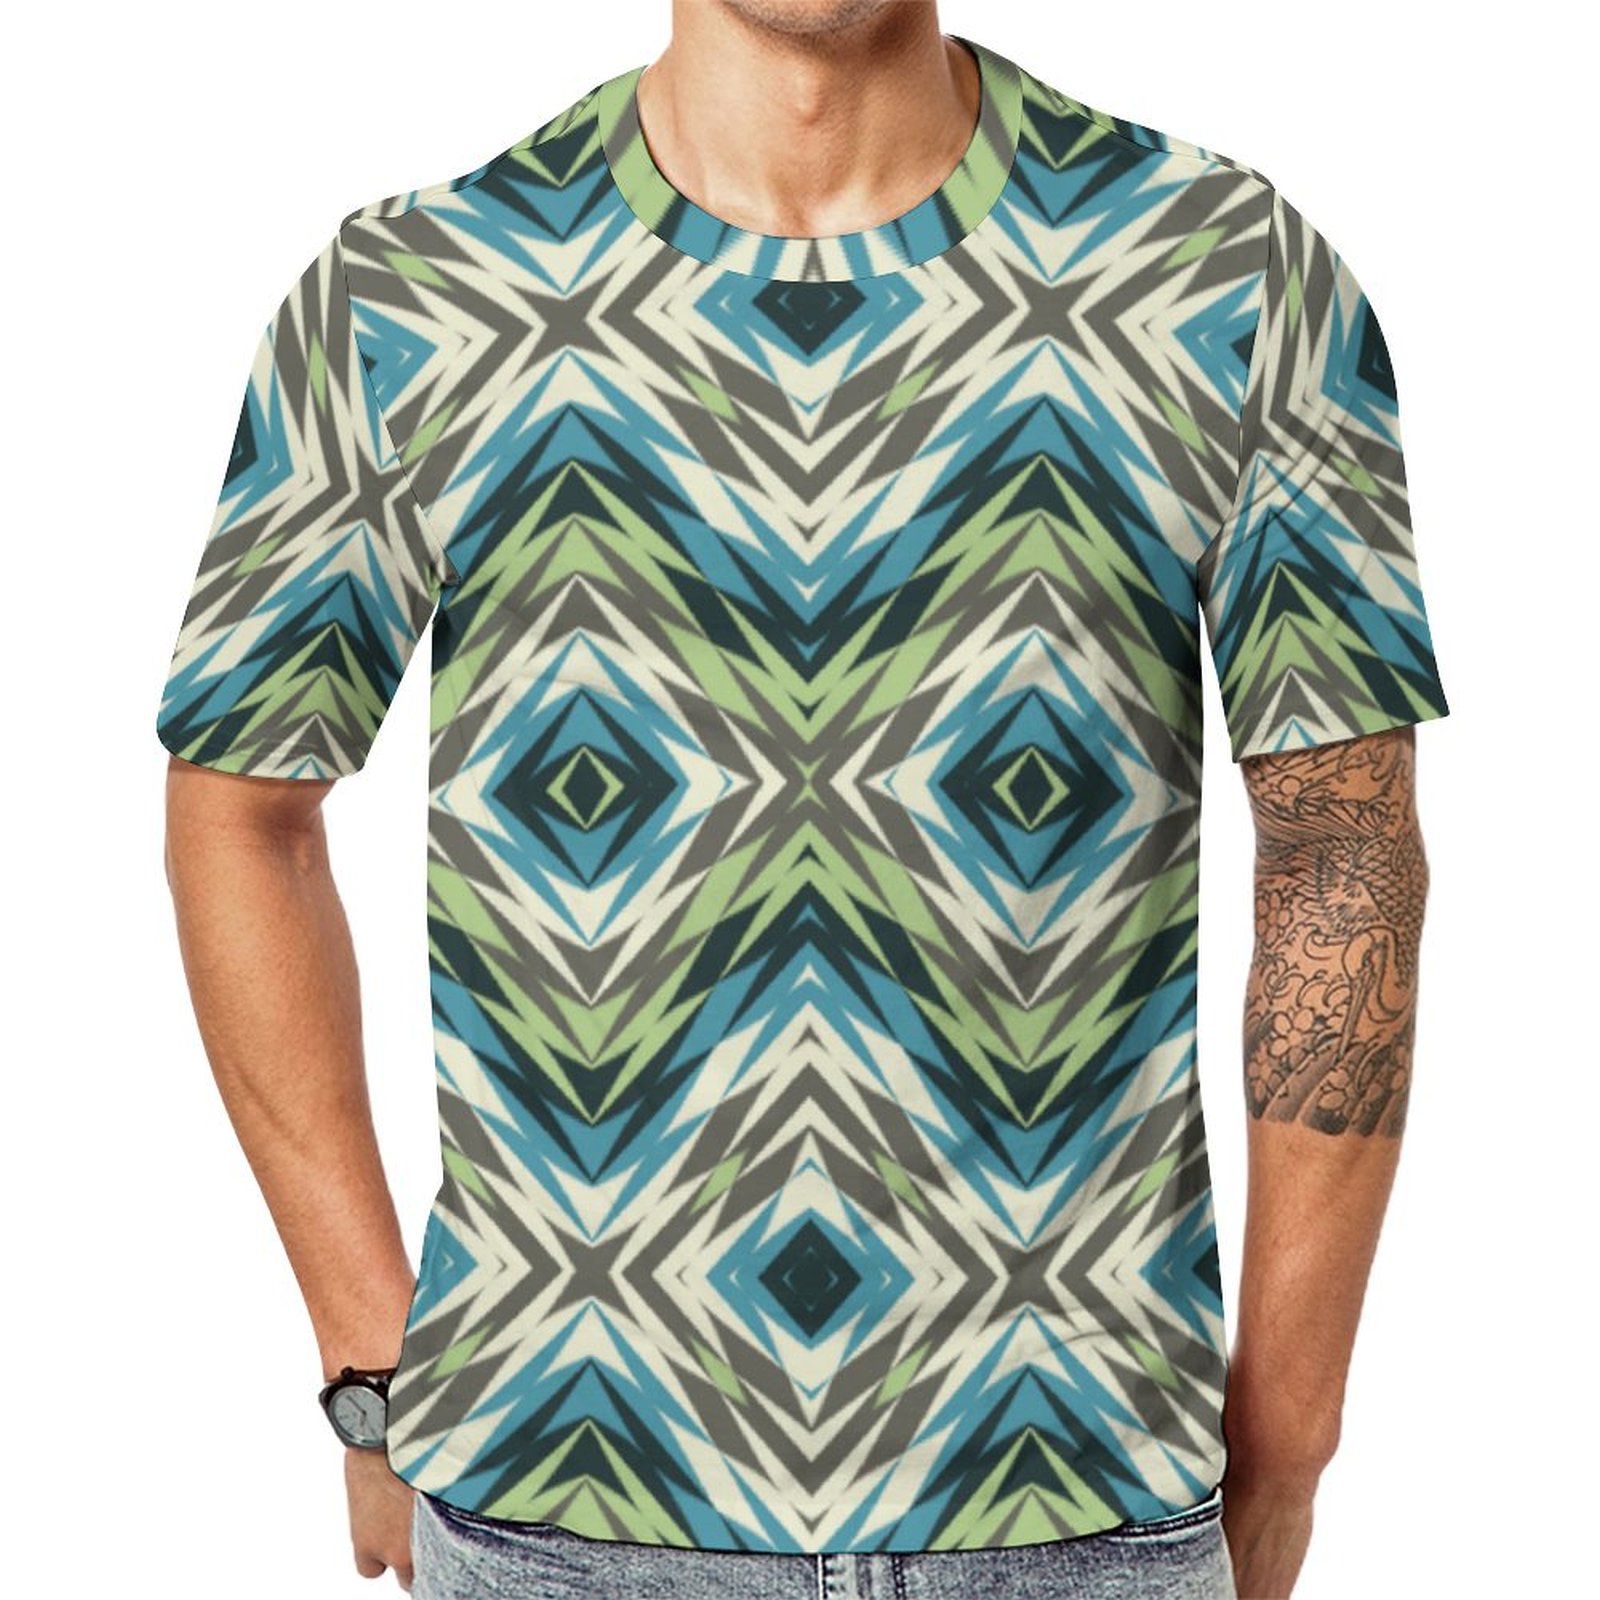 Abstract American Native Indian Mosaic Art  Short Sleeve Print Unisex Tshirt Summer Casual Tees for Men and Women Coolcoshirts